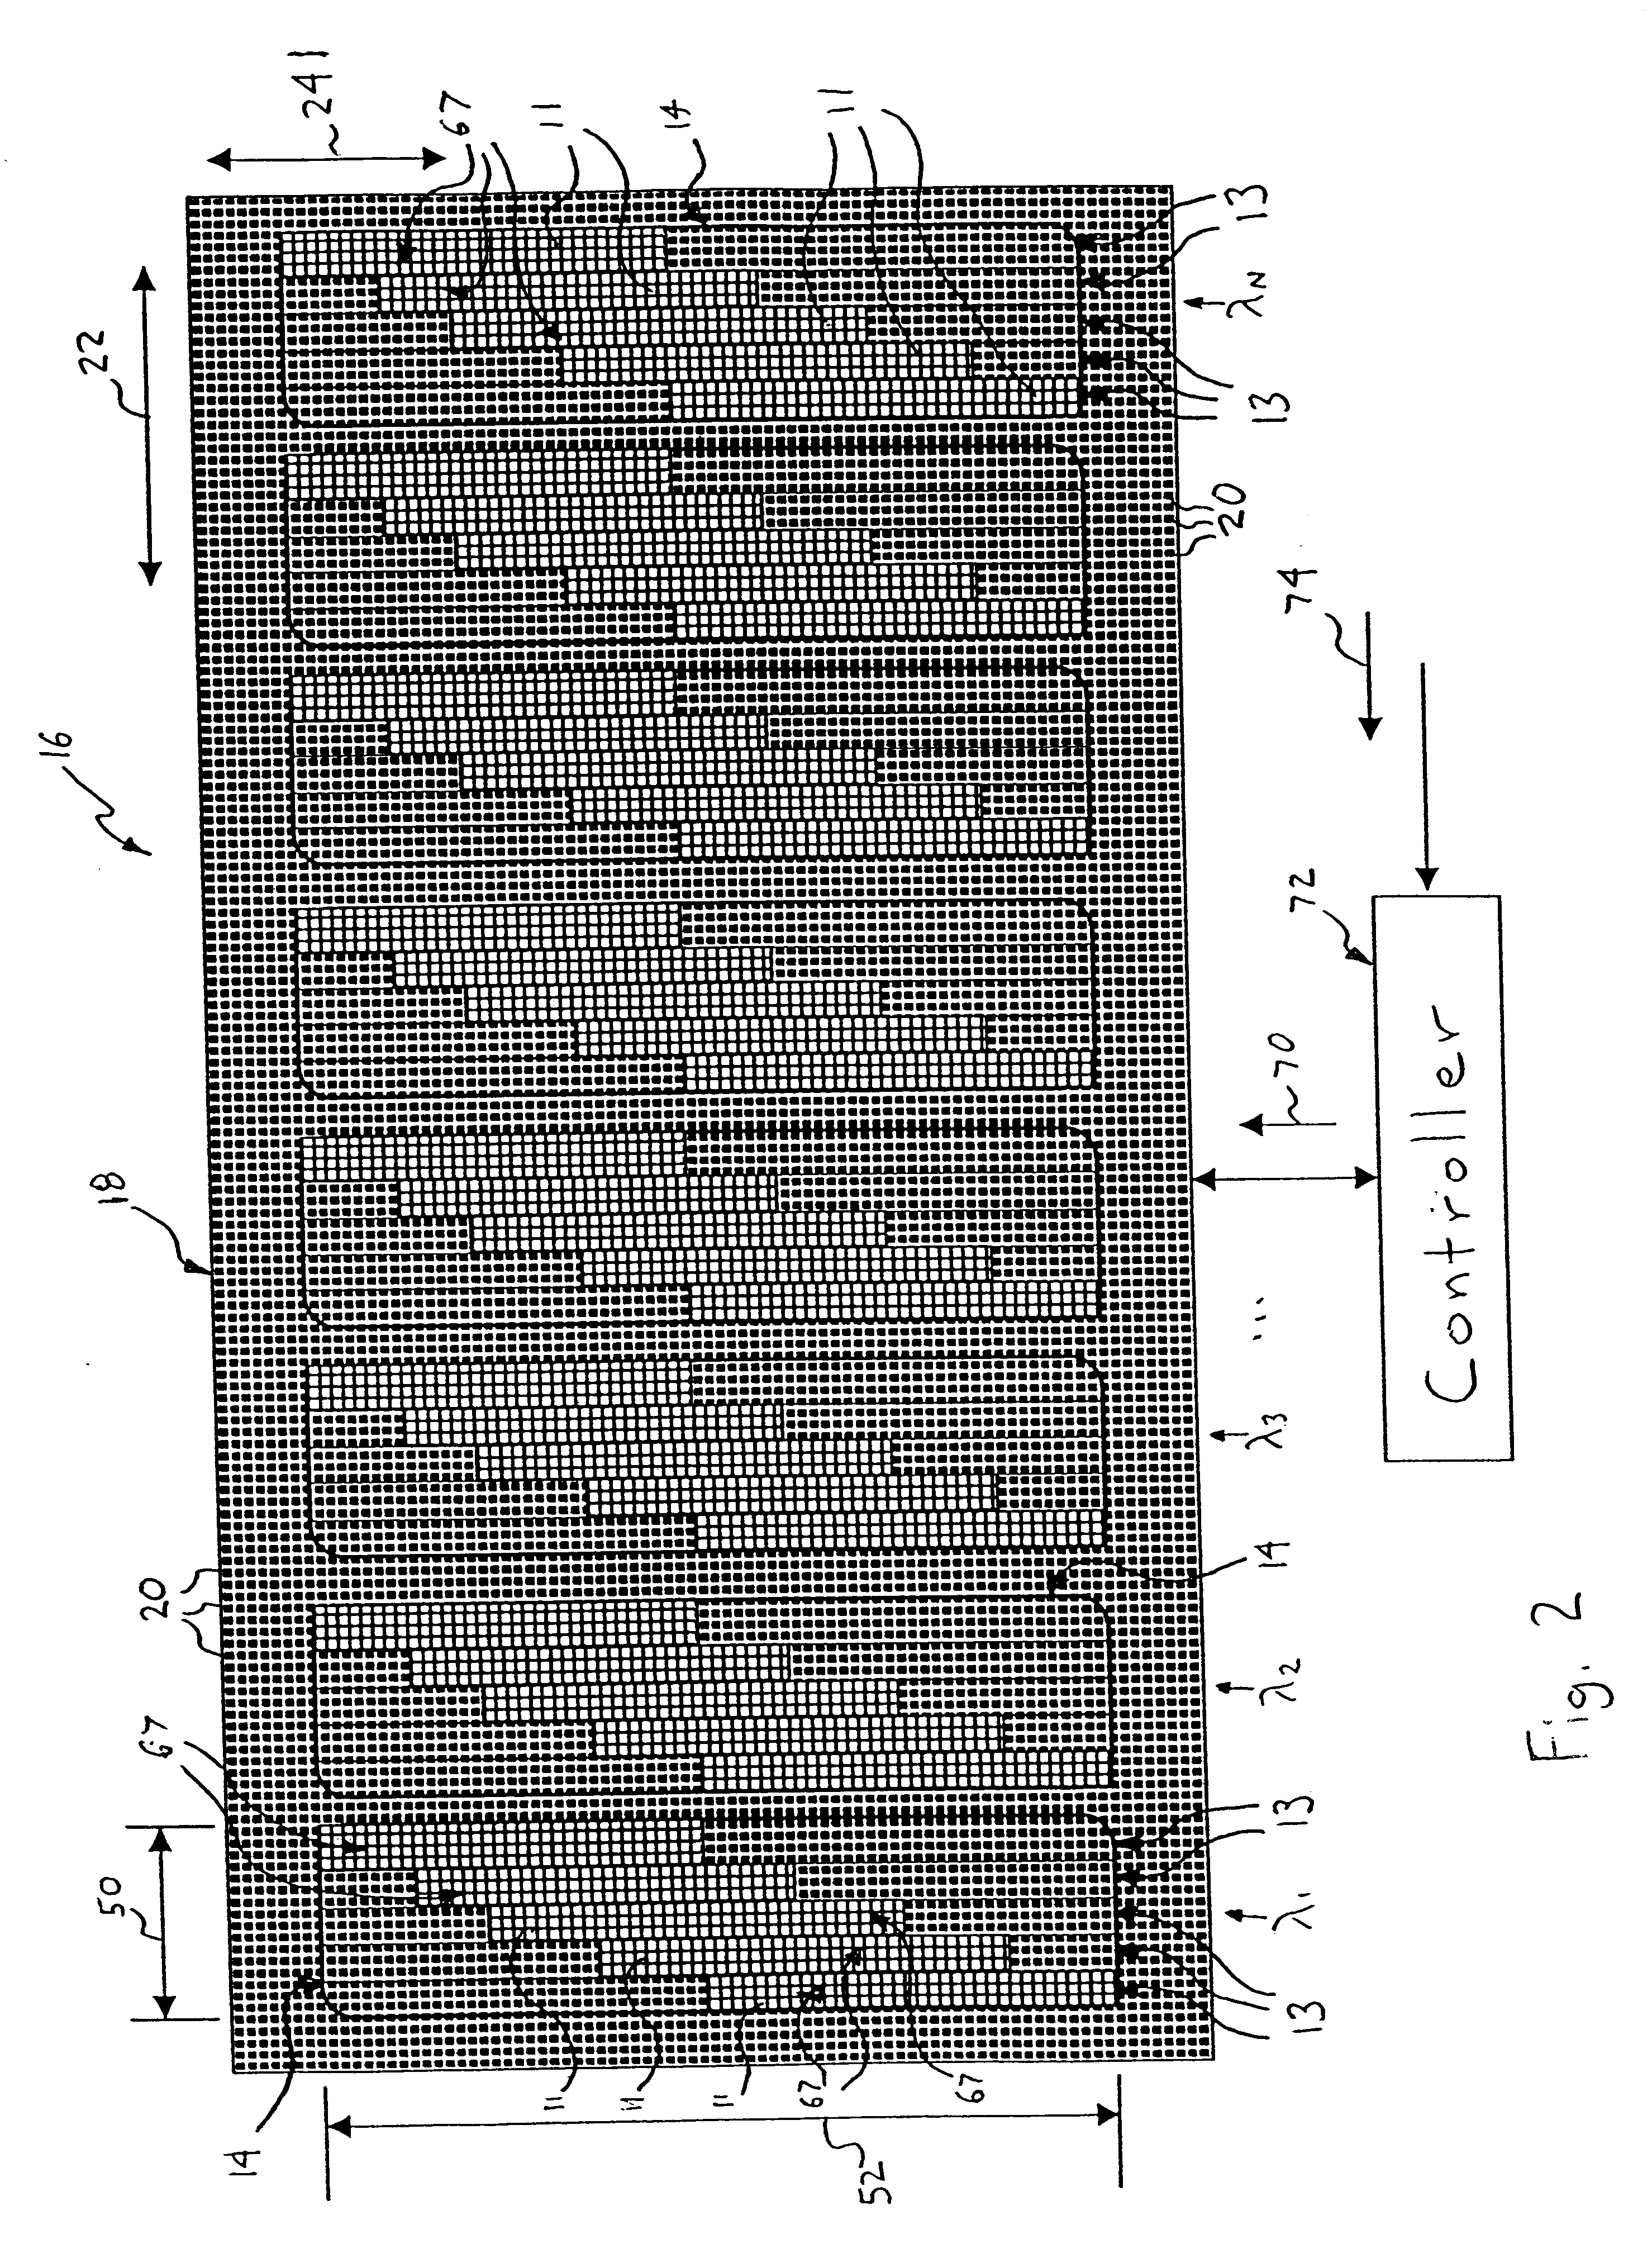 Chromatic dispersion compensation device having an array of micromirrors